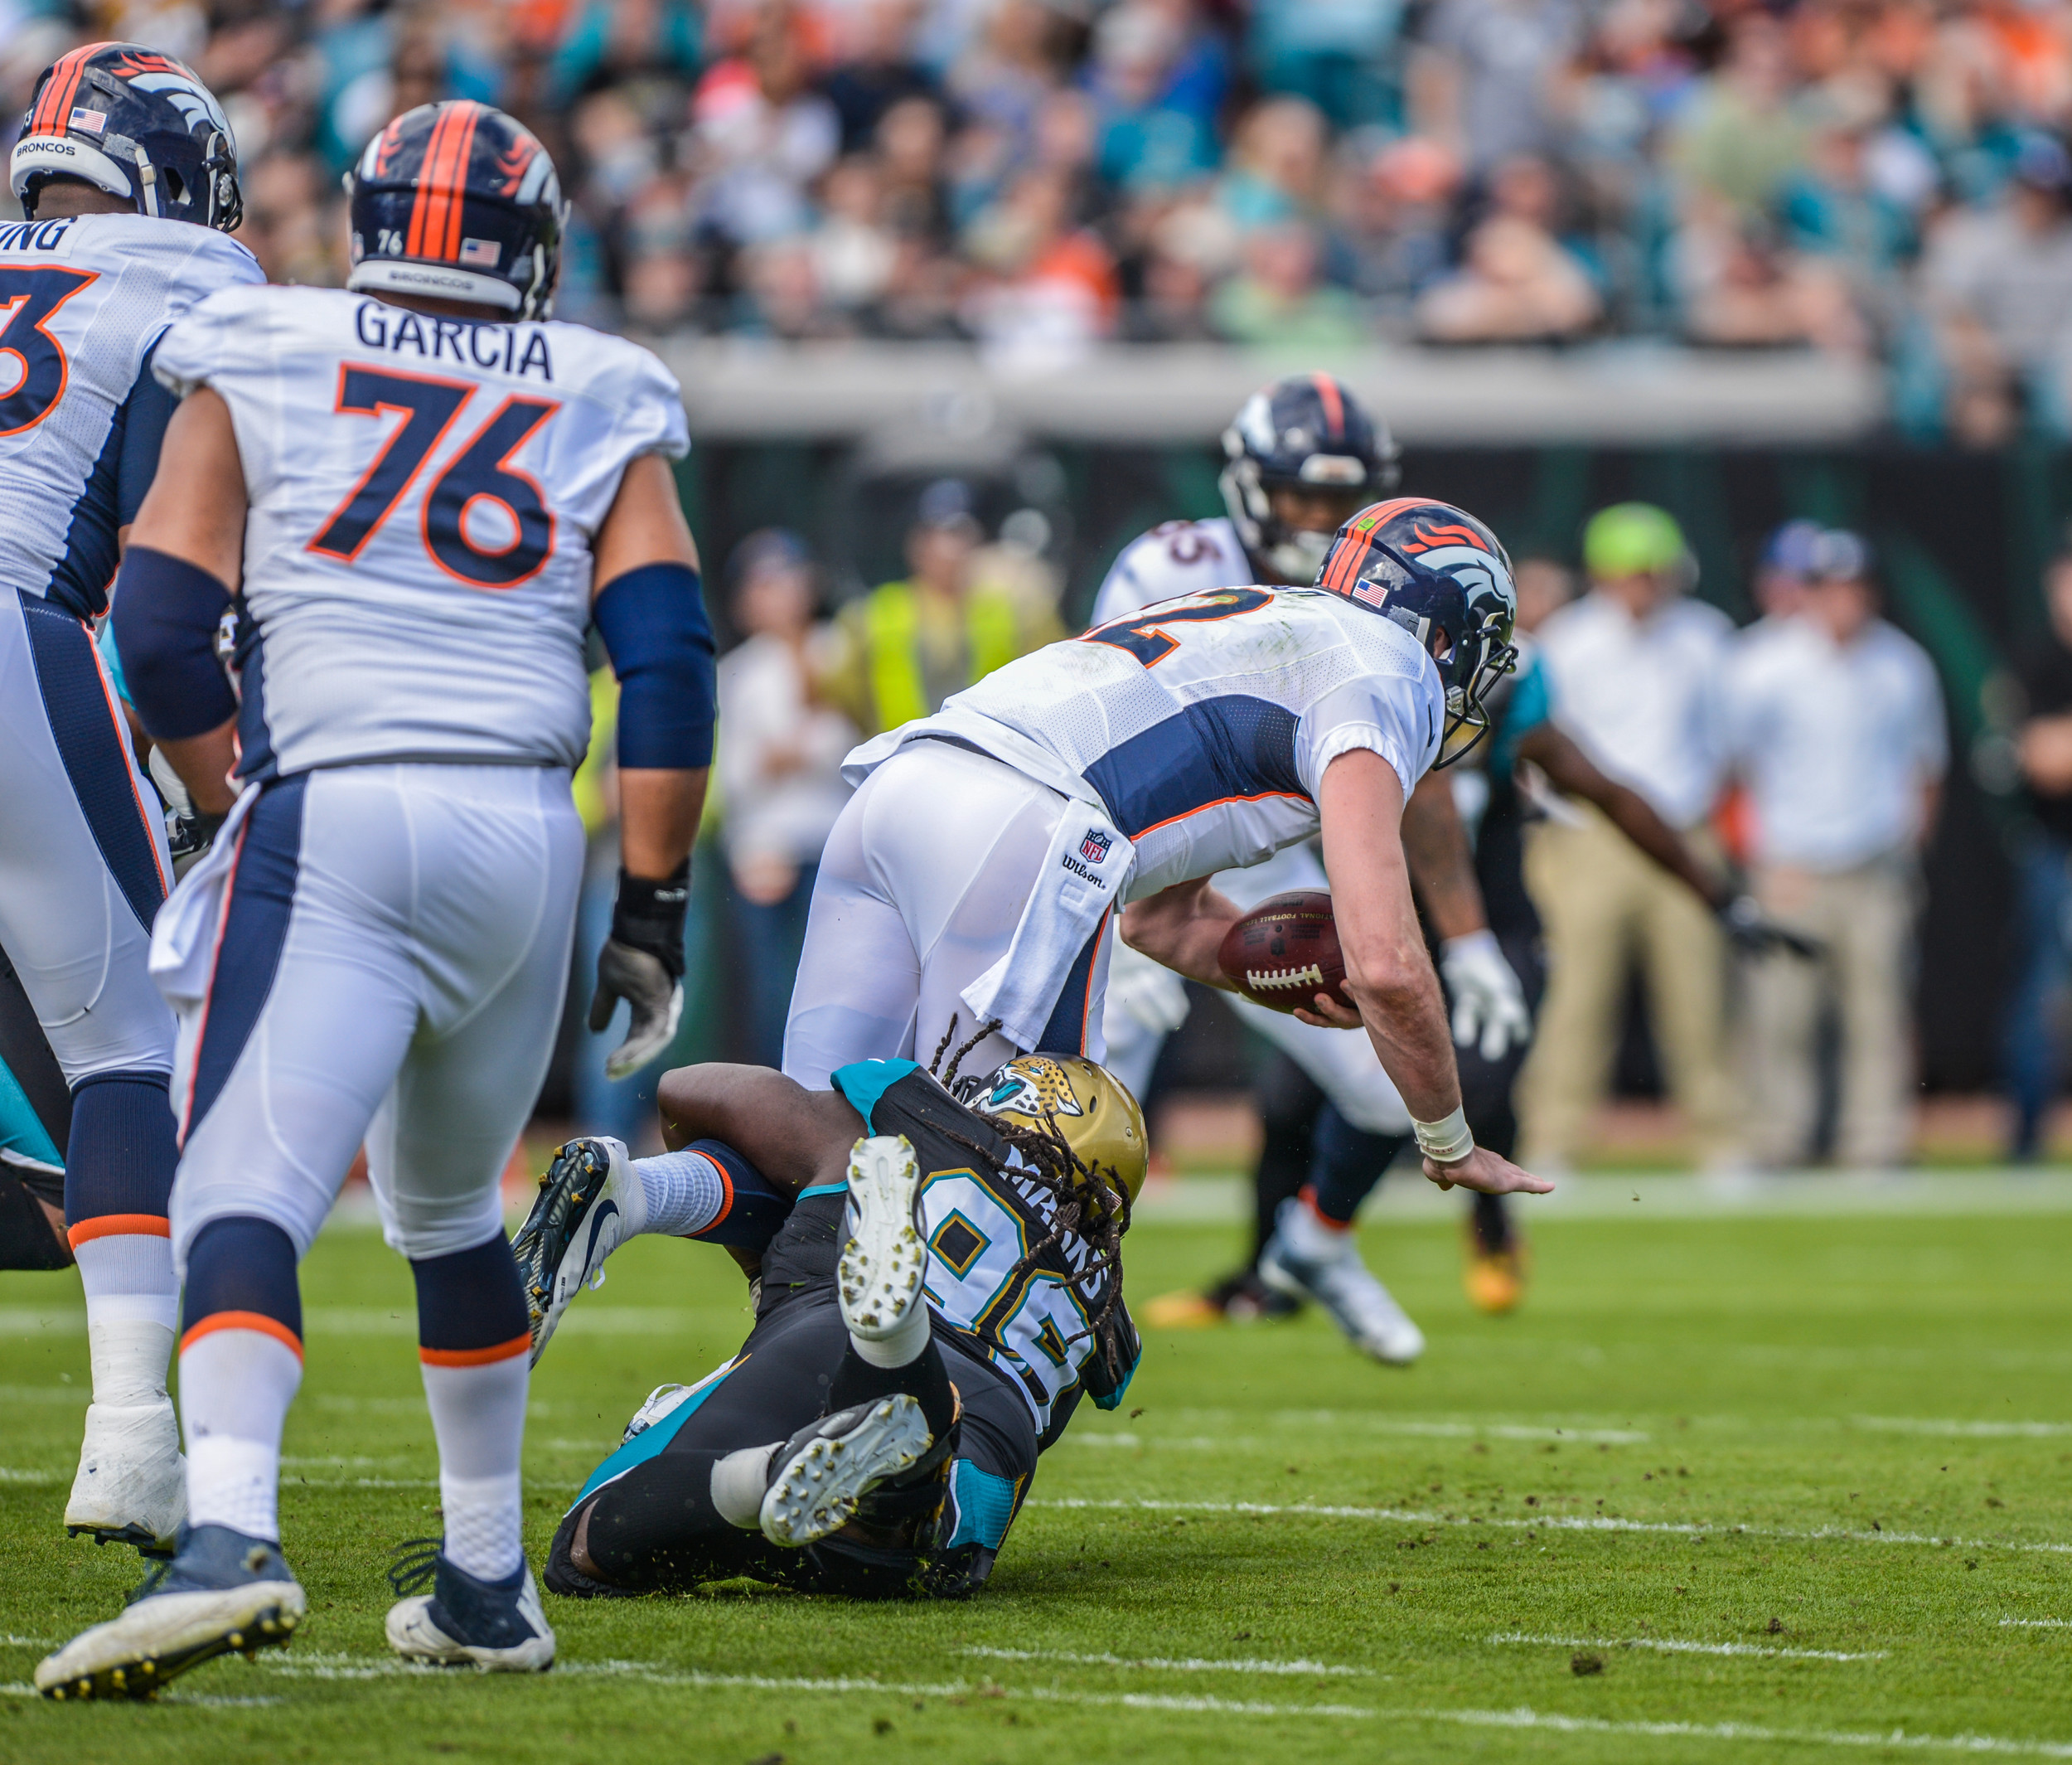 In the 20-10 loss to Denver, Jacksonville QB Blake Bortles (5) scored the Jaguars only touchdown against Denver on a 22-yard run in the fourth quarter.